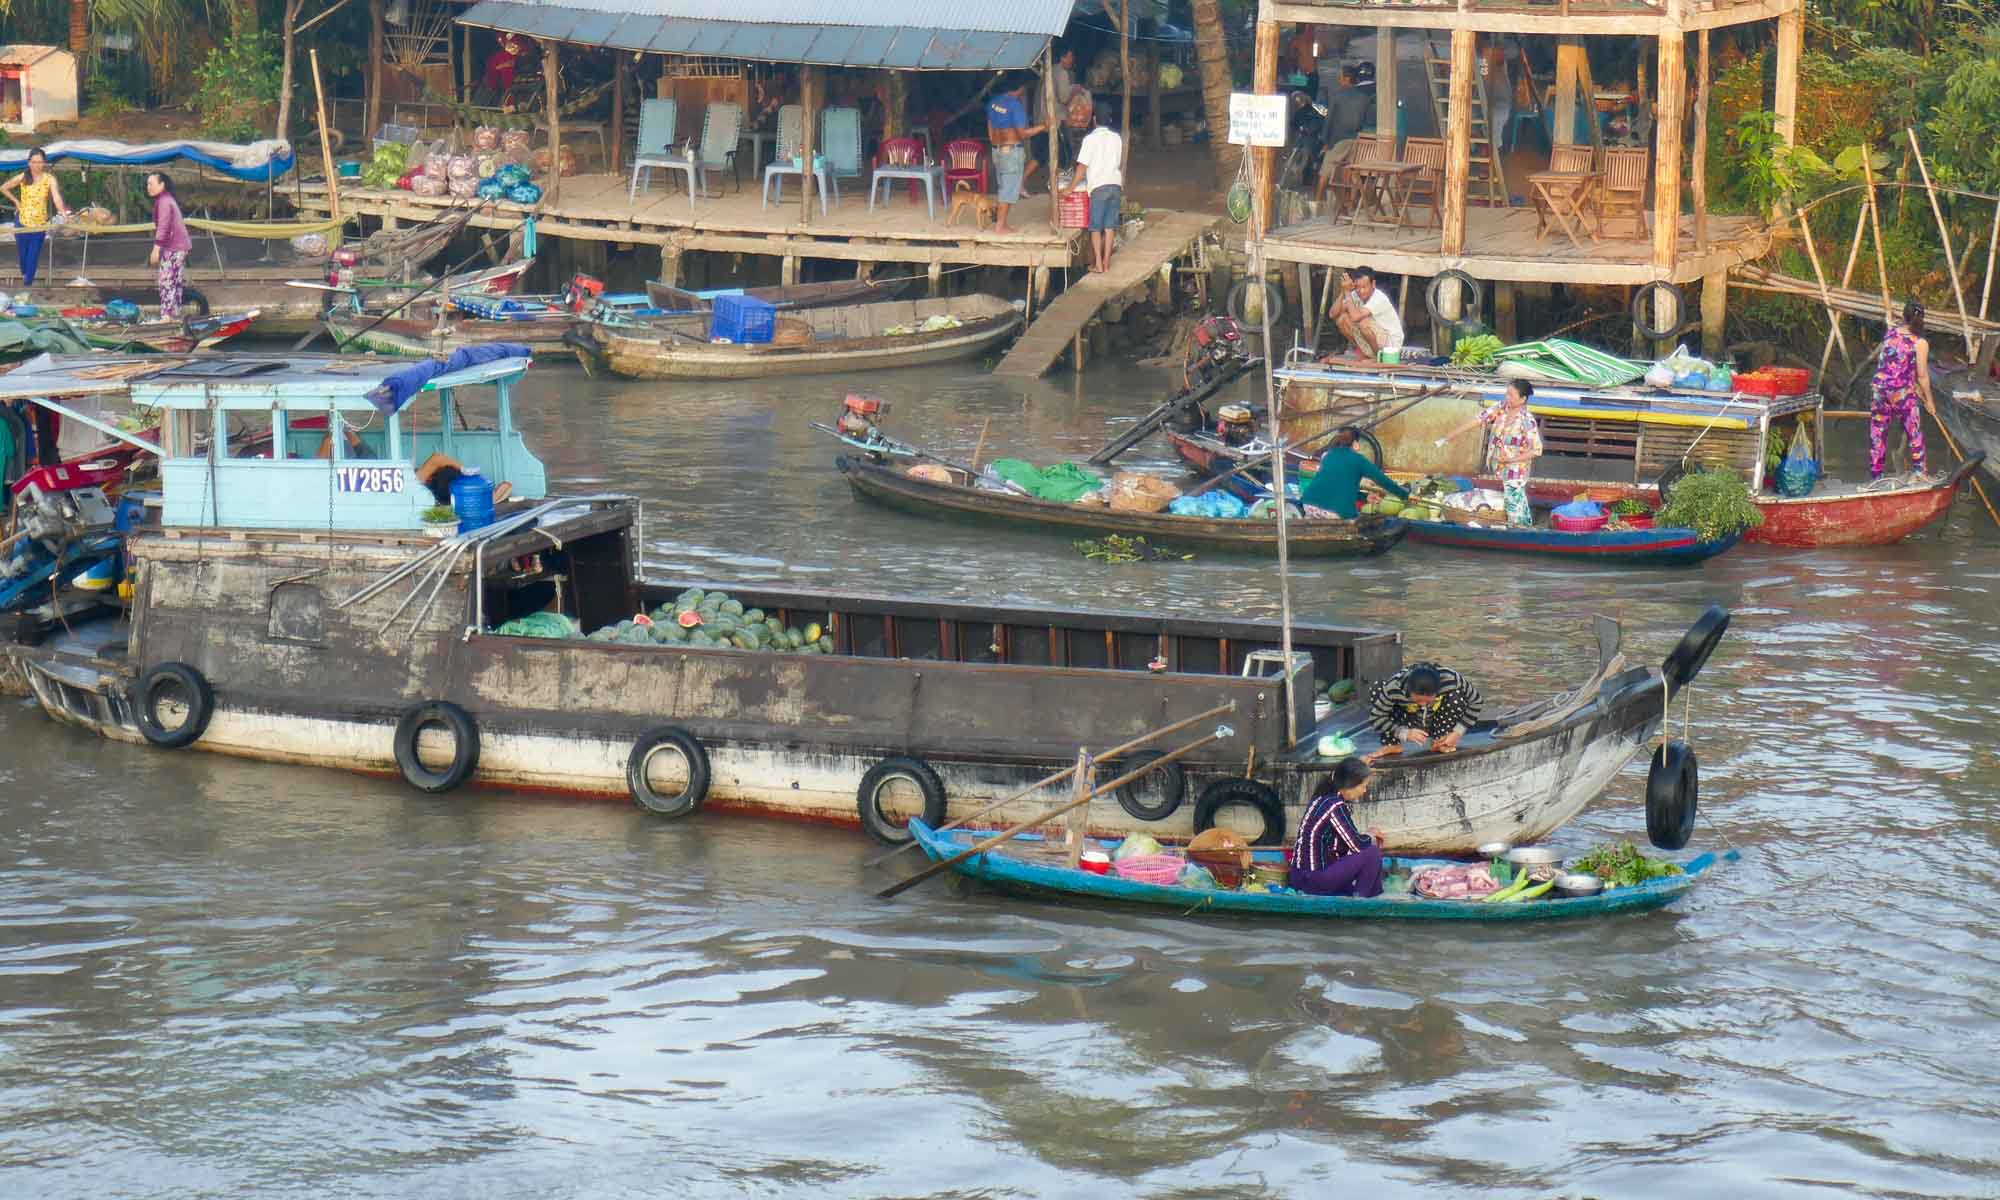 Breakfast is sold to the market traders by small boats